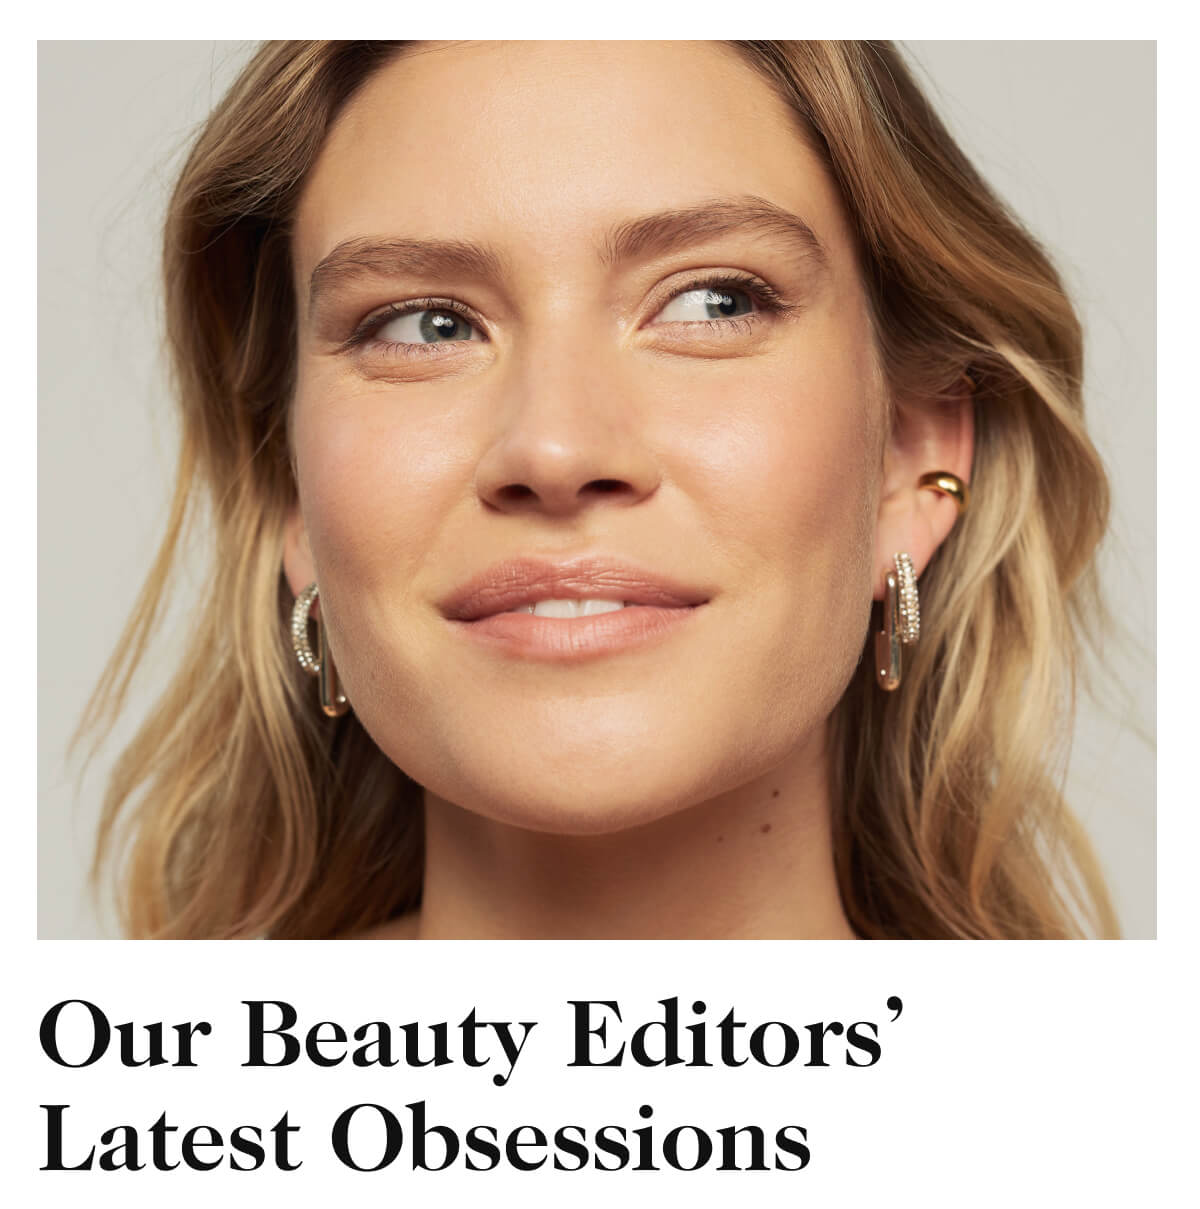 Our Beauty Editors' Latest Obsessions